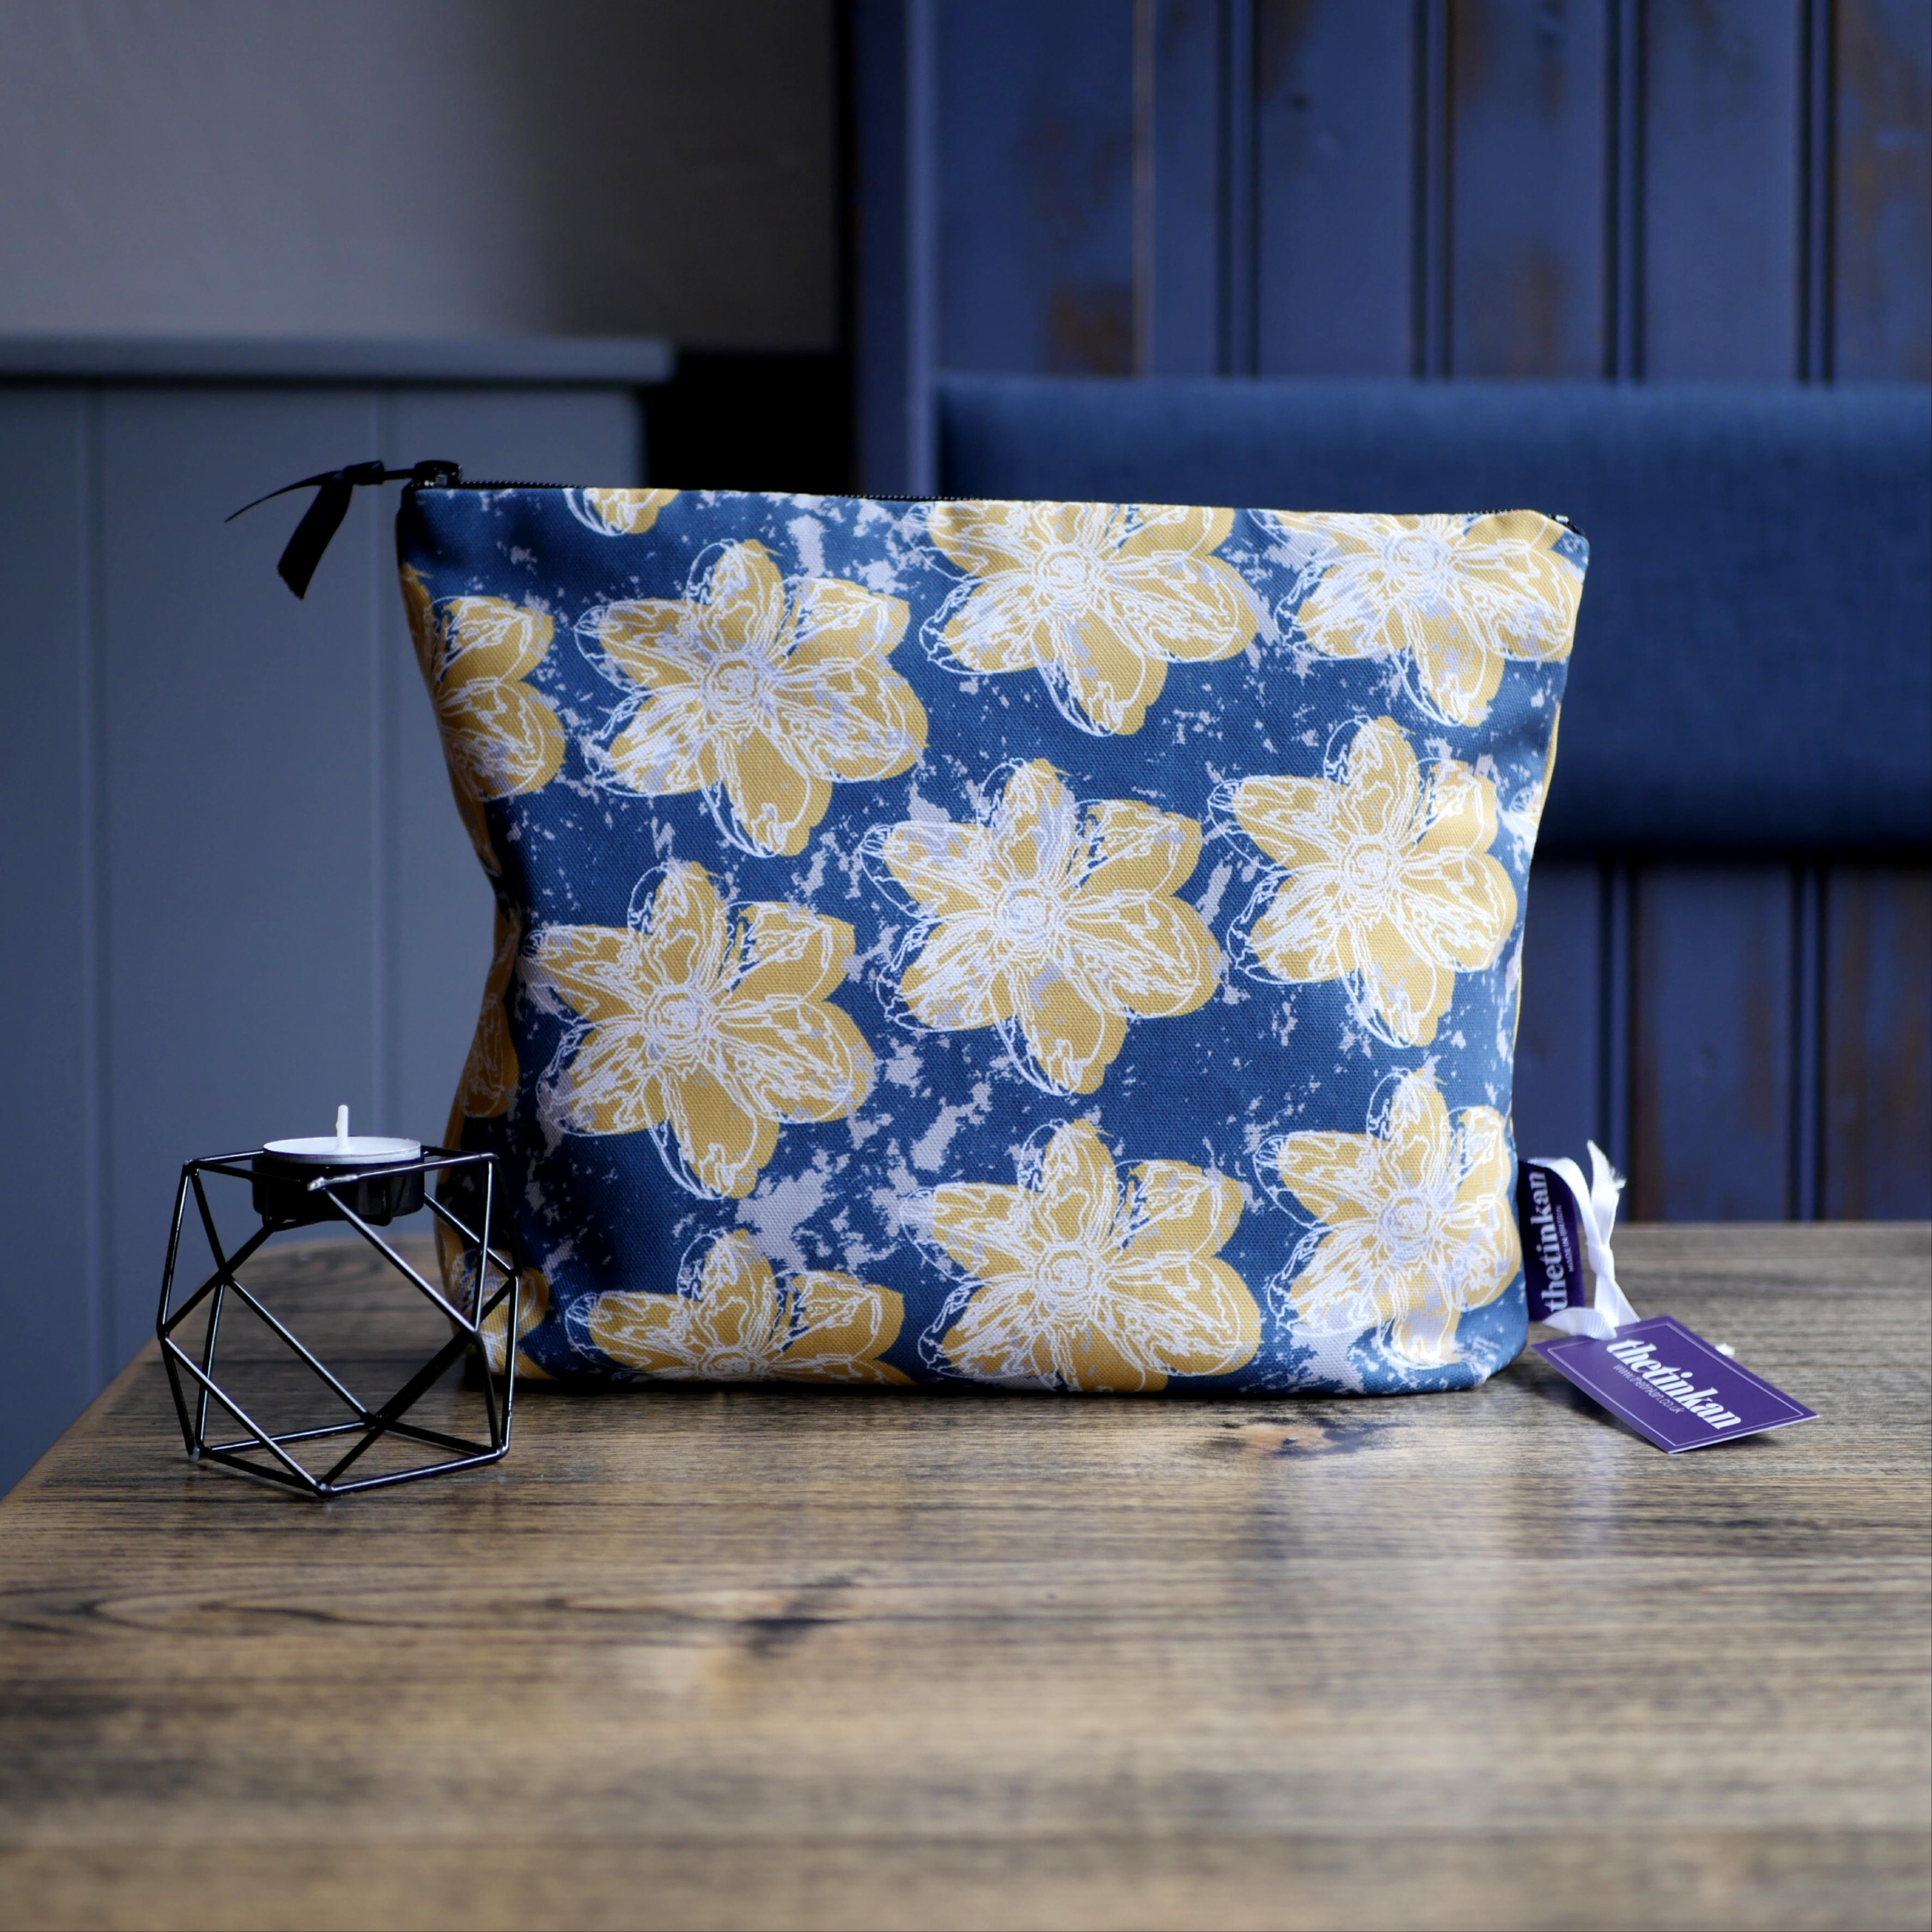 Mustard yellow flower with a matching coloured reverse, set on an oxford blue background with a light grey colour splash. Designed by thetinkan, the flower splash travel beauty washbag featuring the white traced outline of a narcissus flower is made from panama cotton with black waterproof lining and matching black sturdy zip. Generously sized for all your travel or home needs.  VIEW PRODUCT >>